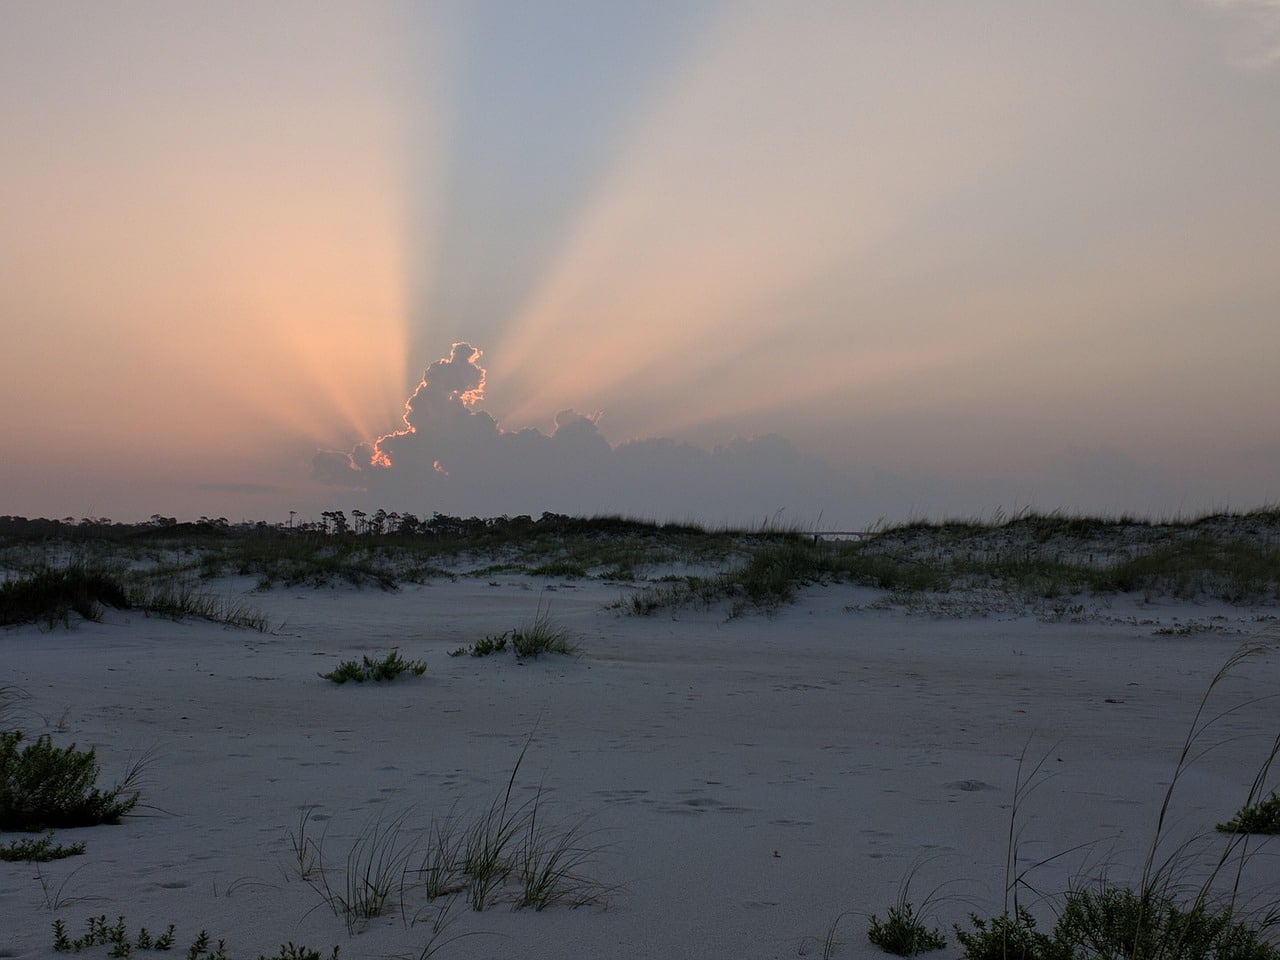 Perdido Key at sunset, Florida, USA - home to the Perdido Key River Road Park, one of the best dog beaches in Pensacola